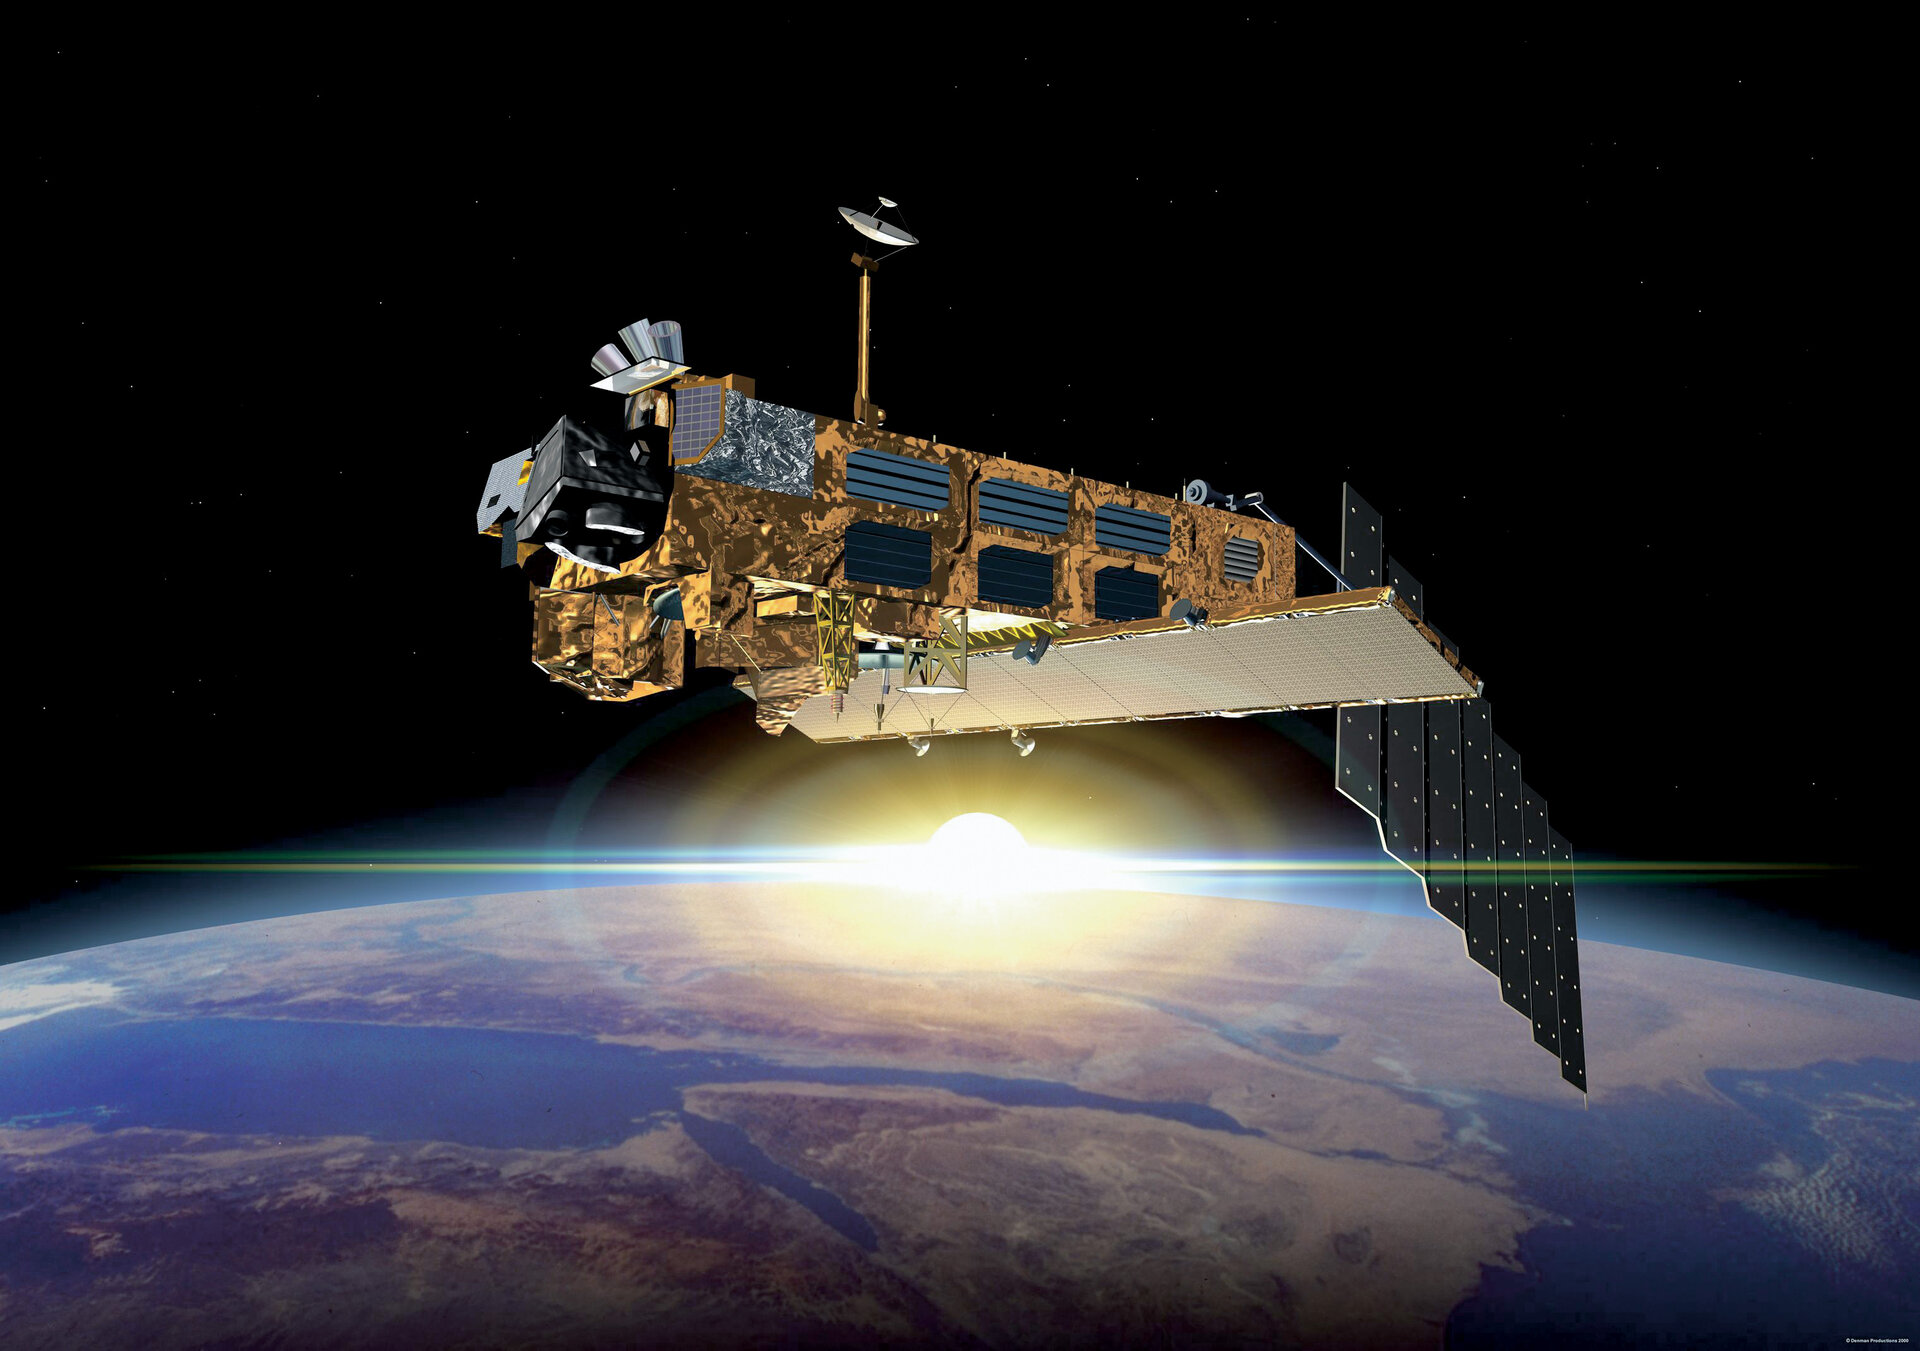 ESA Member States unanimously voted to extend the Envisat mission through to 2013